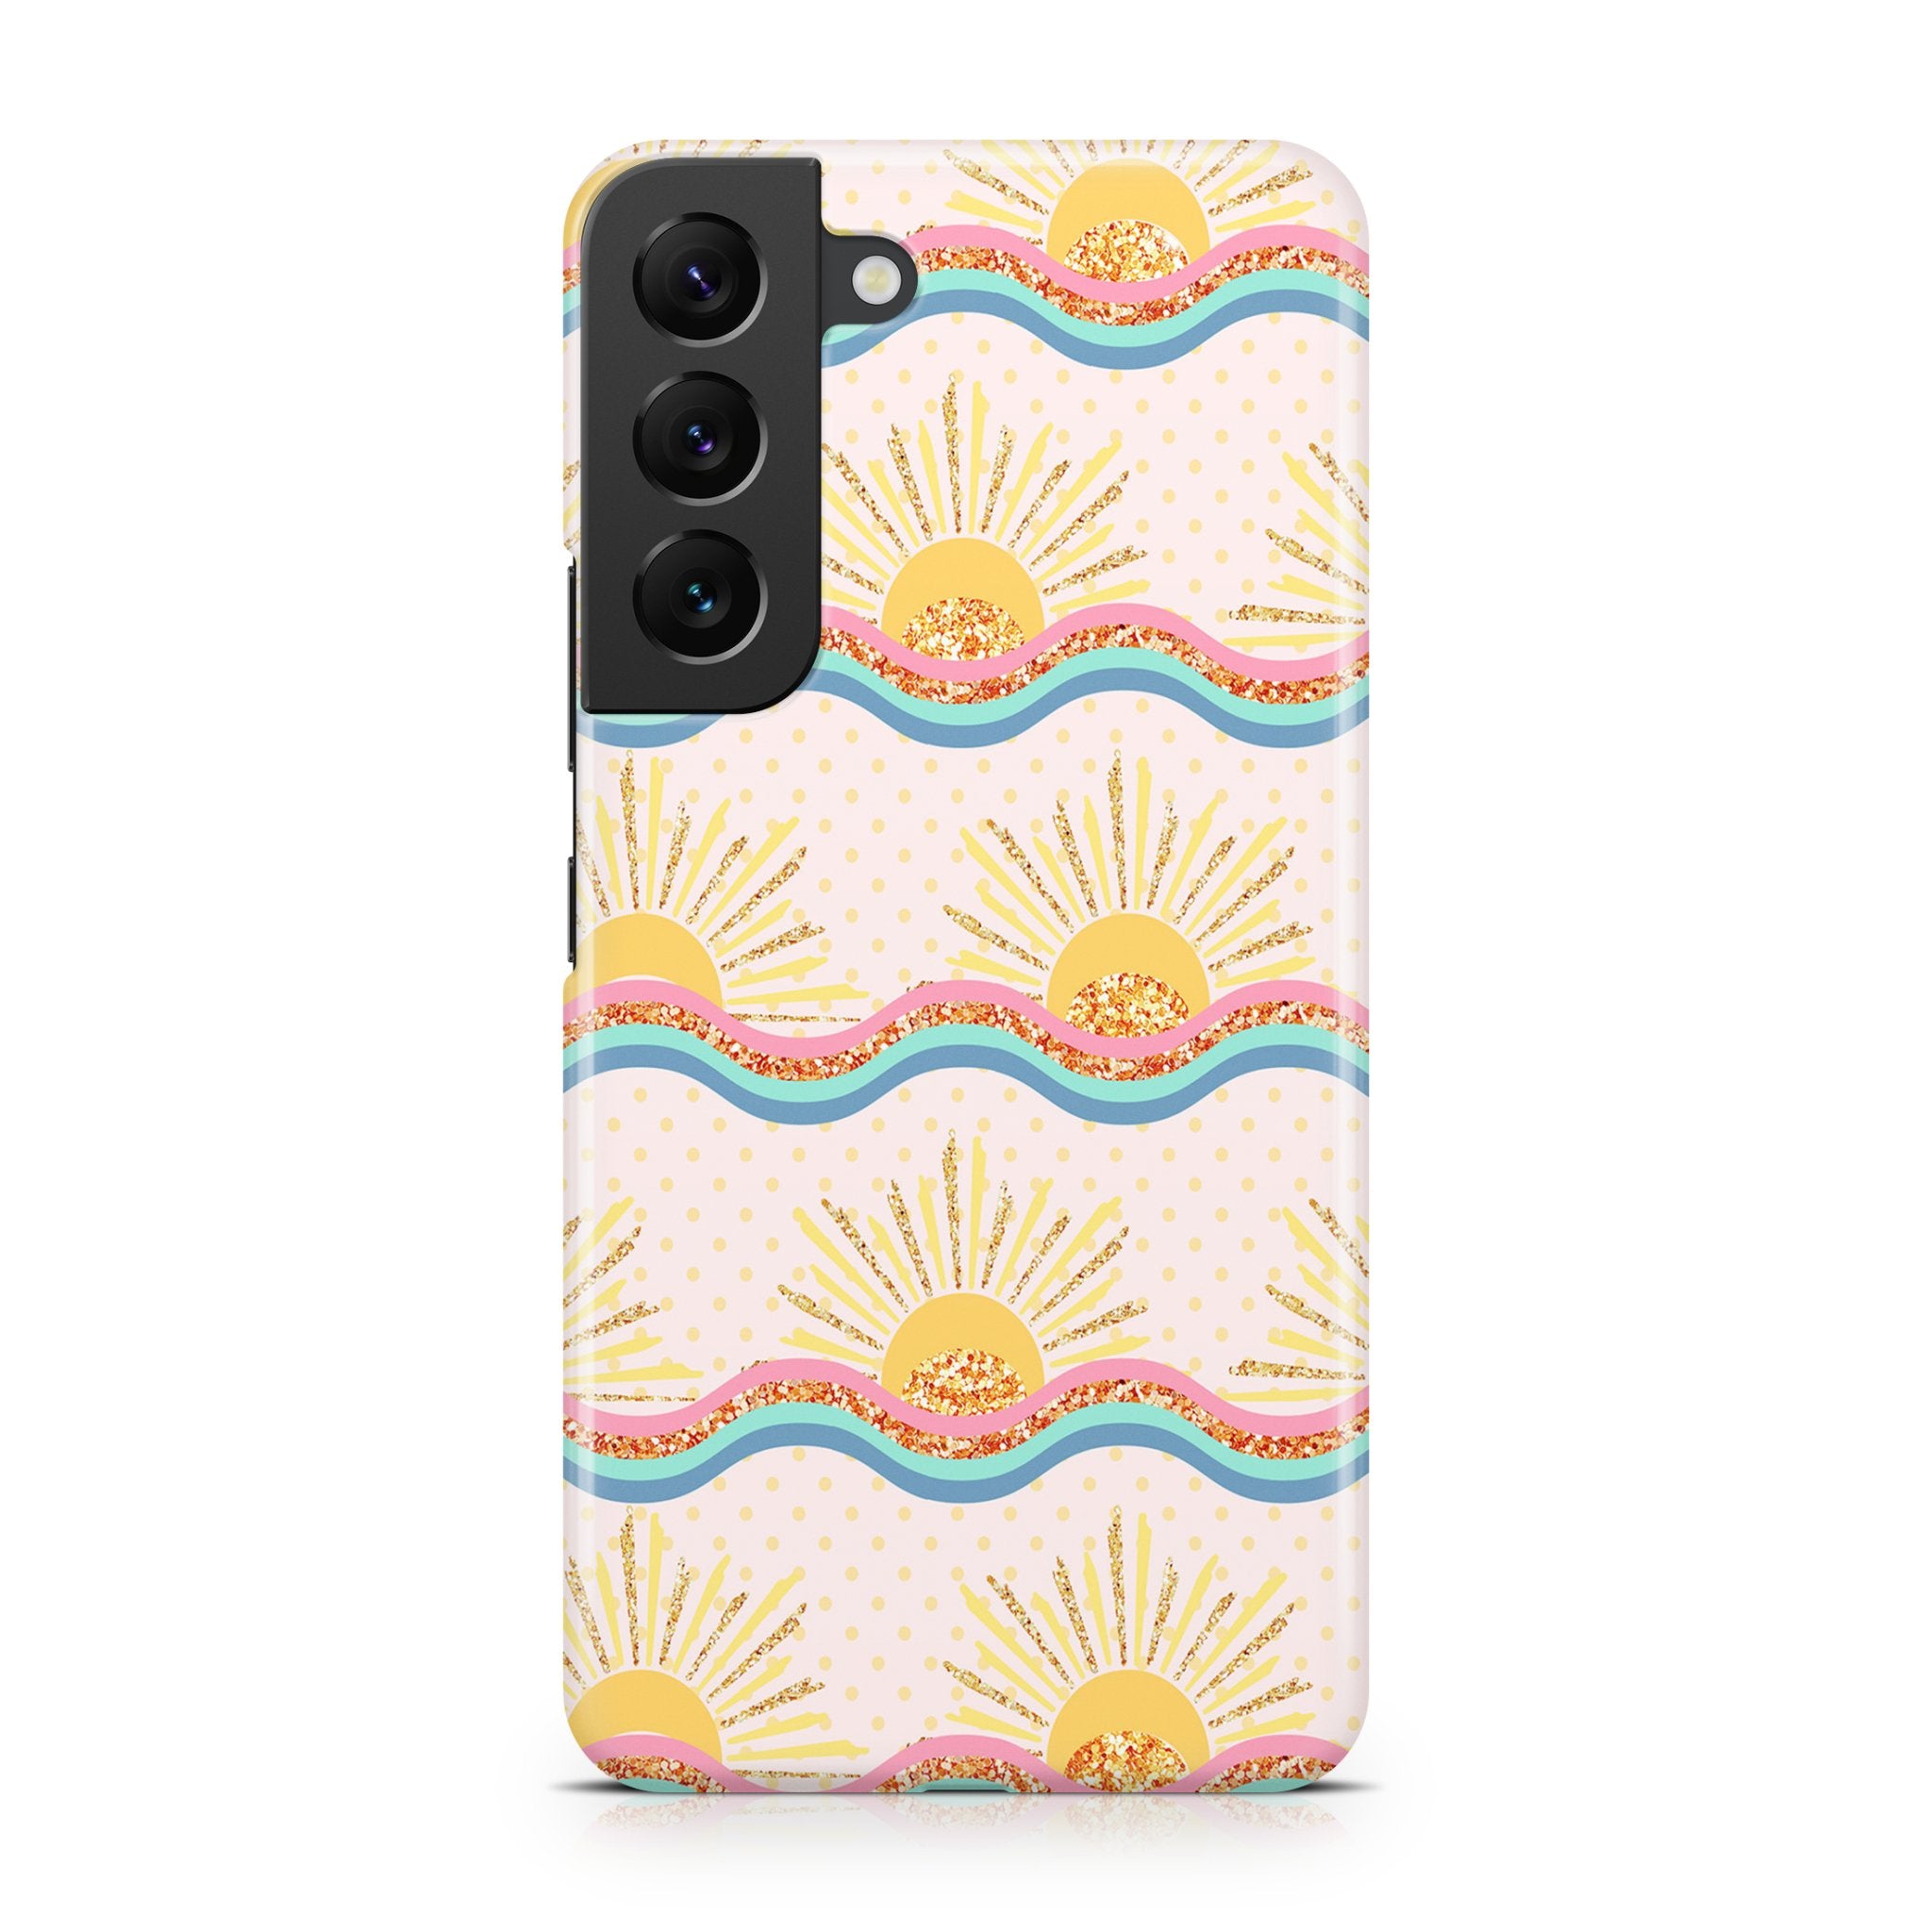 Happy Sun - Samsung phone case designs by CaseSwagger